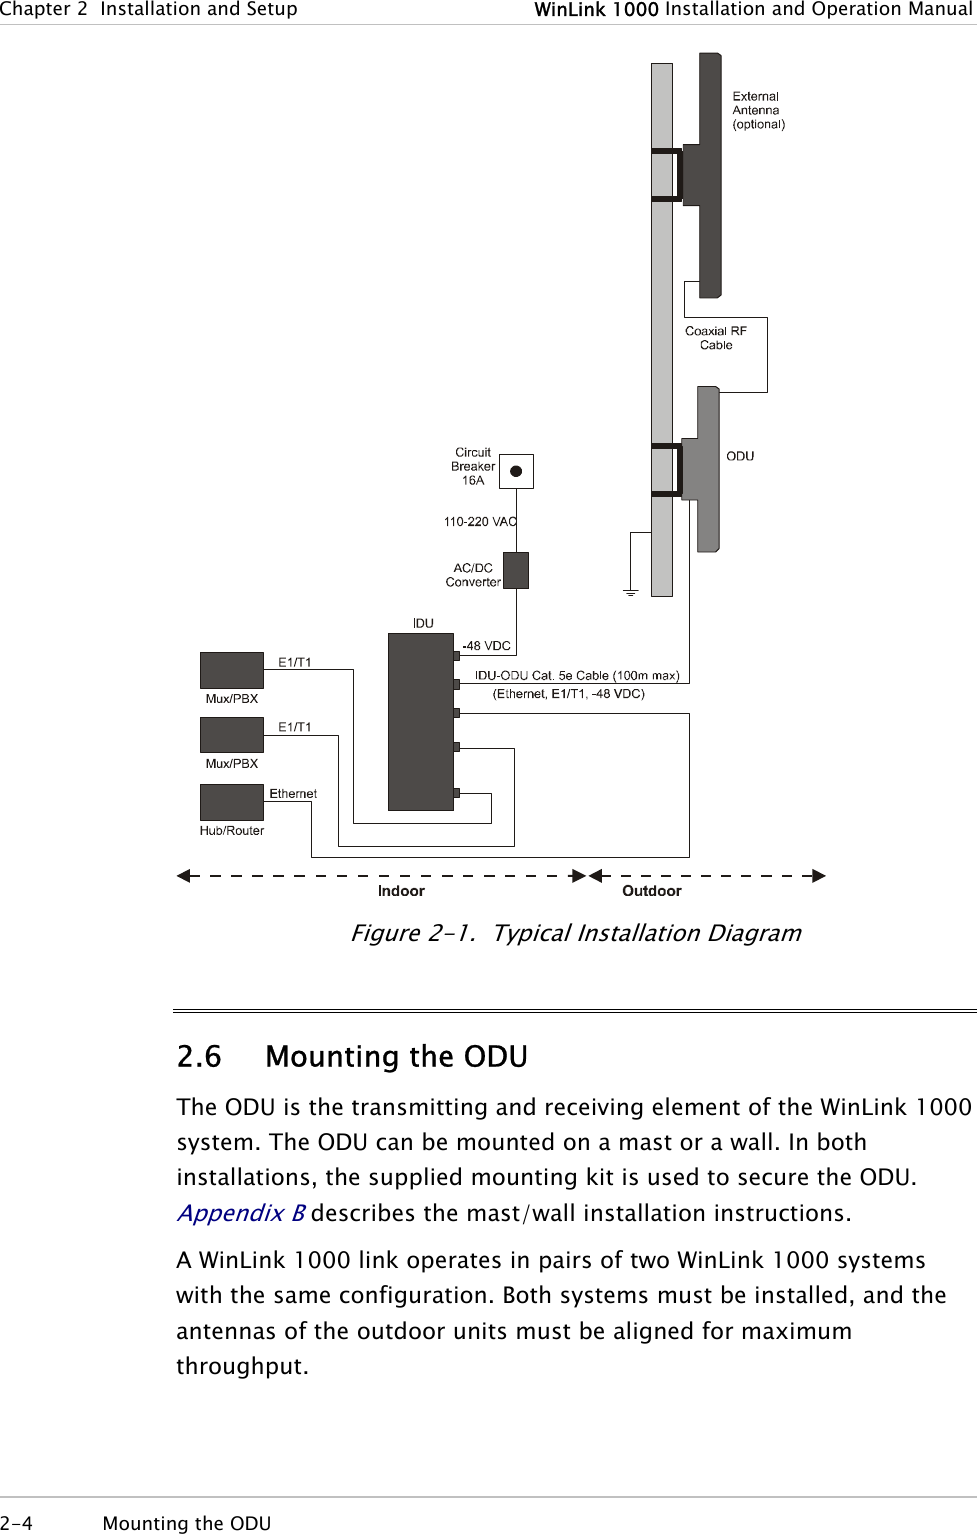 Chapter  2  Installation and Setup  WinLink 1000 Installation and Operation Manual  Figure  2-1.  Typical Installation Diagram 2.6 Mounting the ODU The ODU is the transmitting and receiving element of the WinLink 1000 system. The ODU can be mounted on a mast or a wall. In both installations, the supplied mounting kit is used to secure the ODU. Appendix B describes the mast/wall installation instructions. A WinLink 1000 link operates in pairs of two WinLink 1000 systems with the same configuration. Both systems must be installed, and the antennas of the outdoor units must be aligned for maximum throughput. 2-4 Mounting the ODU   